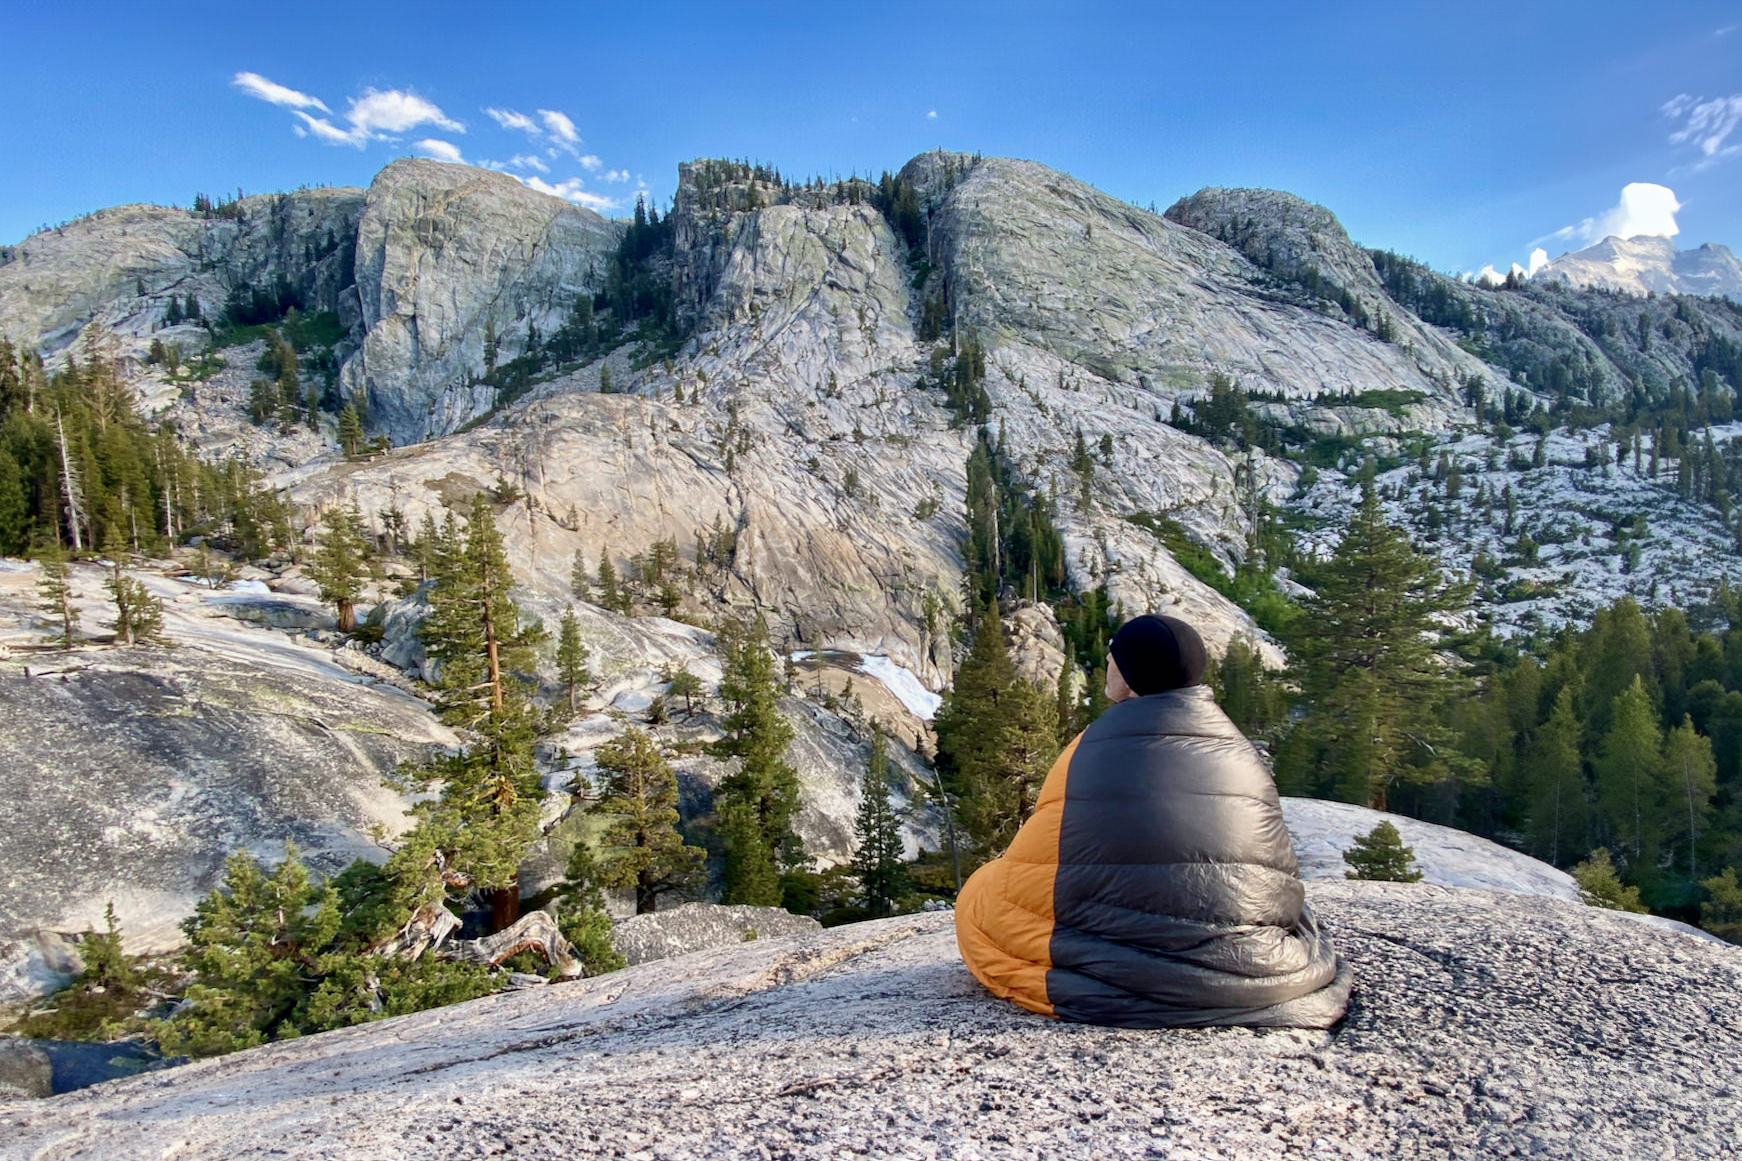 A backpacker wrapped up in the Enlightened Equipment Revelation sleeping quilt while sitting on a rocky slab overlooking bare granite mountains across the valley